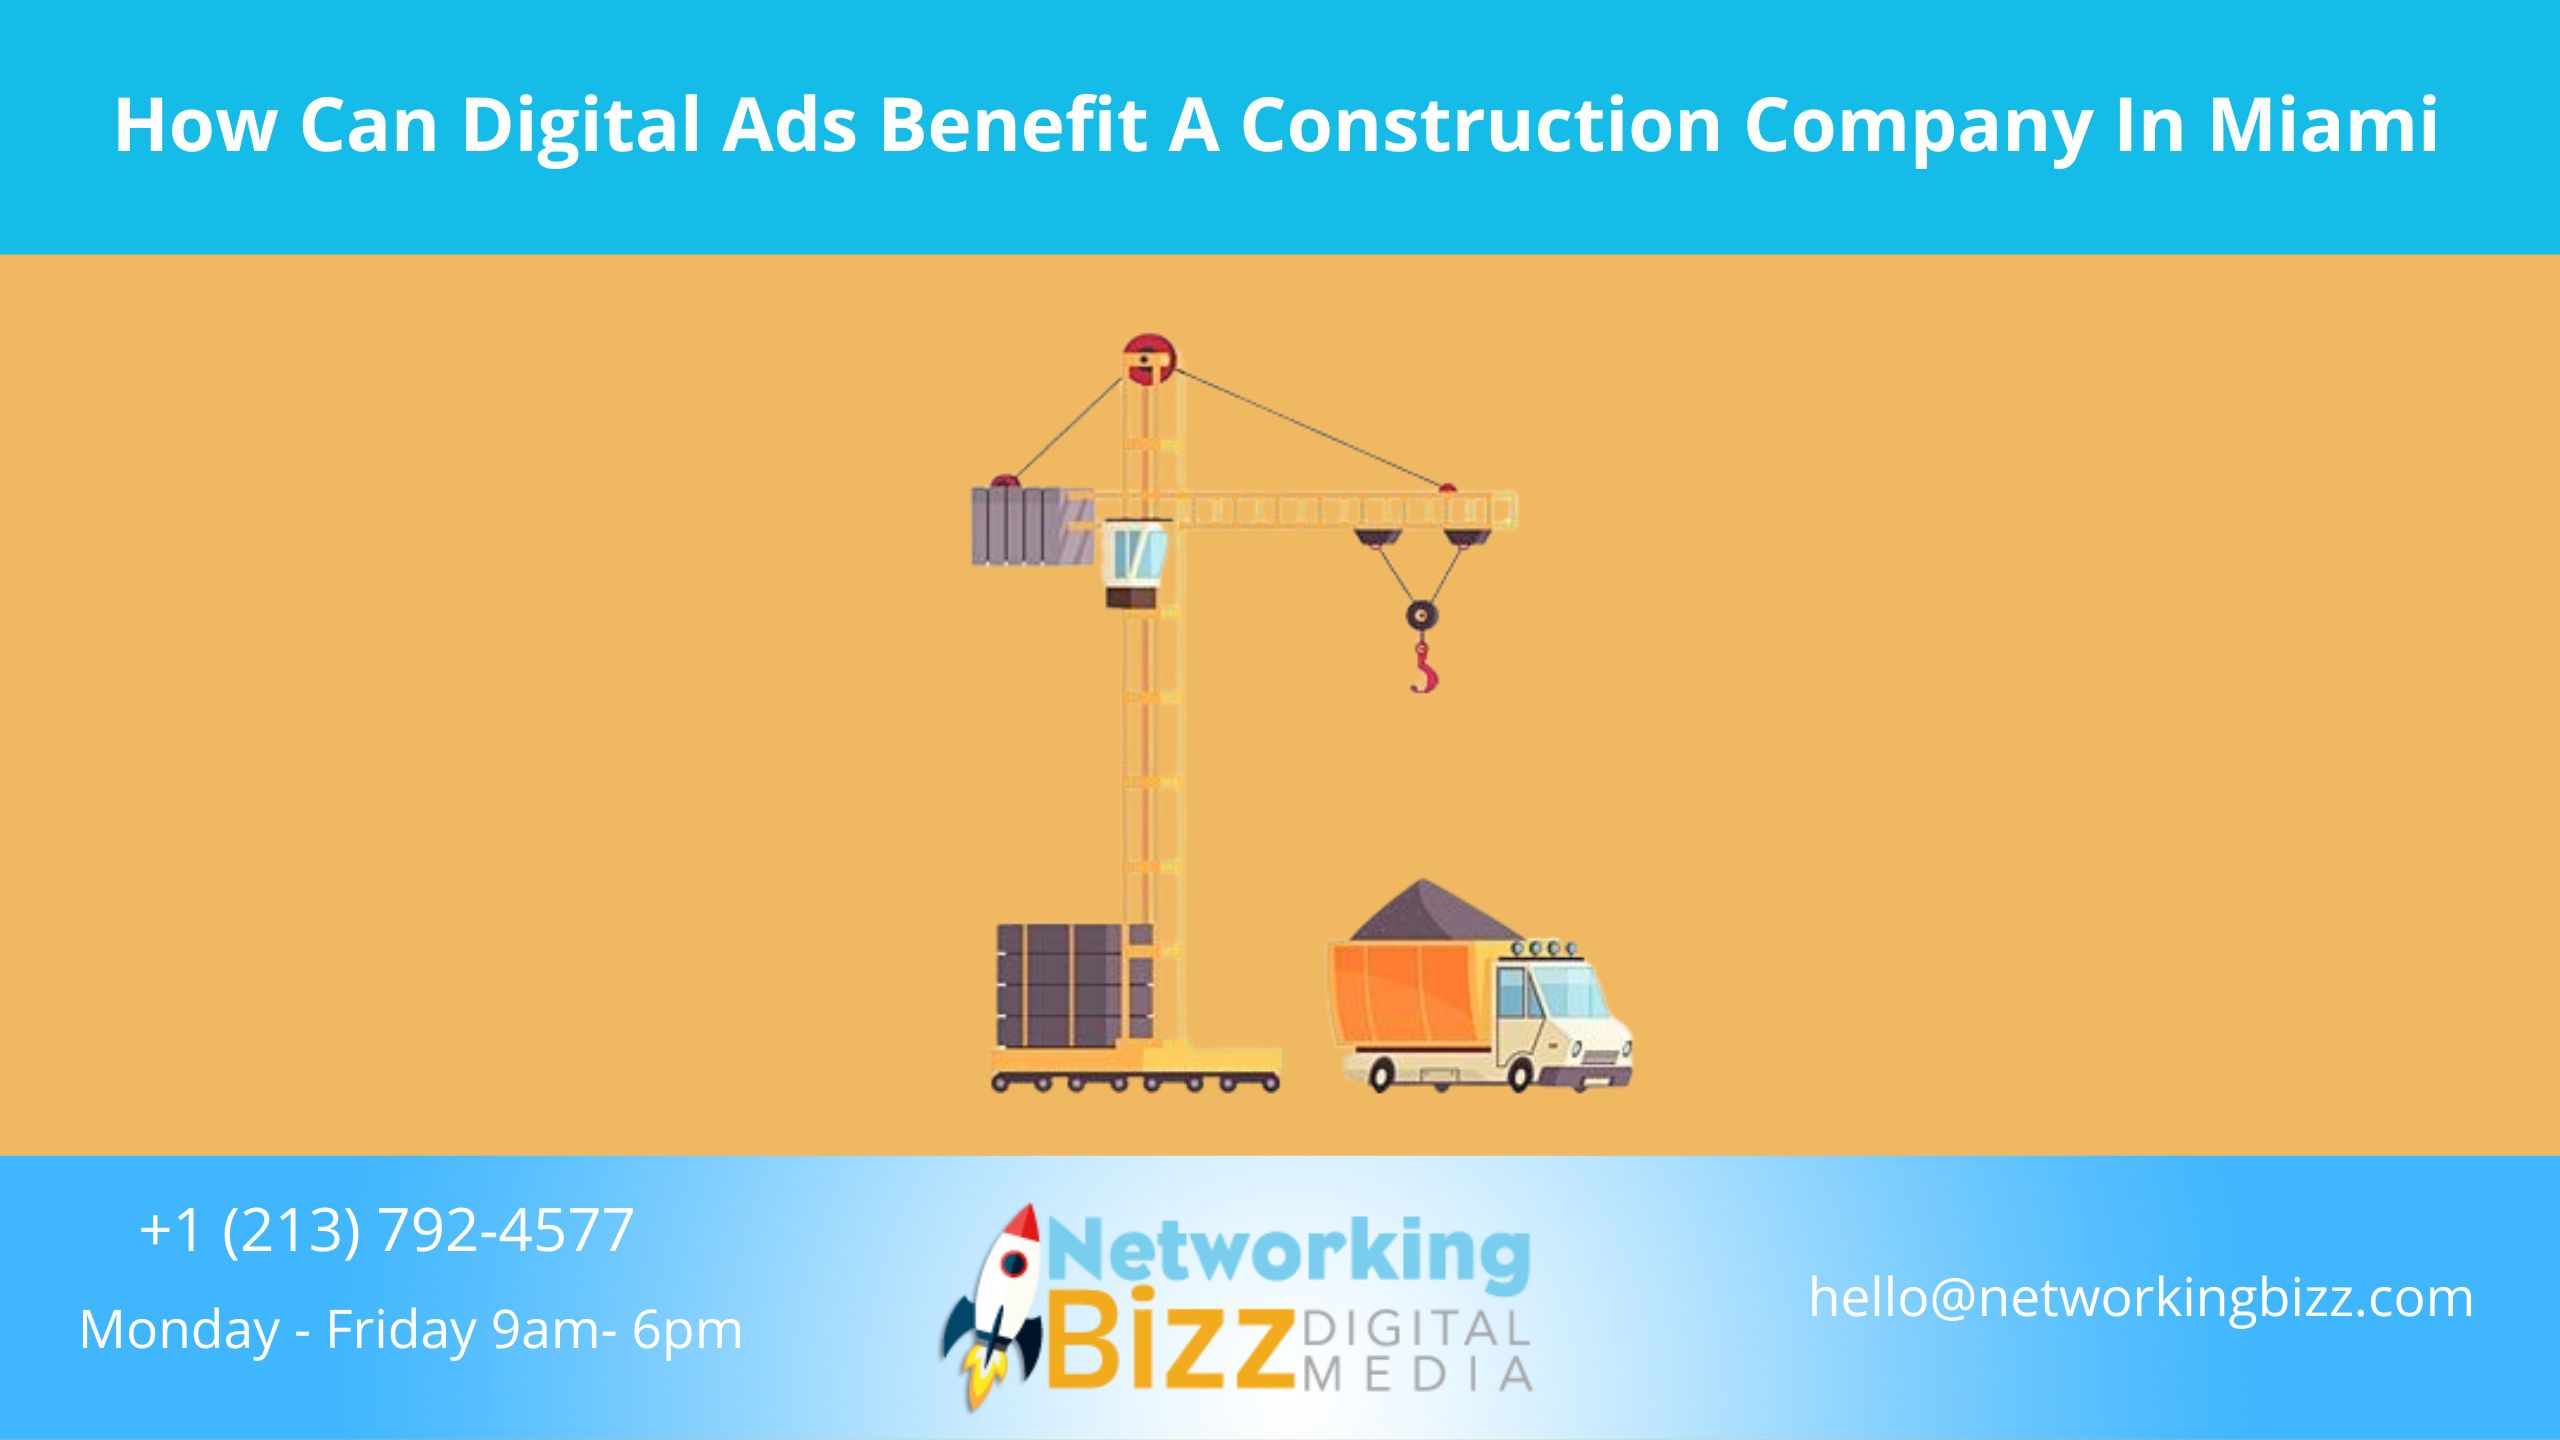 How Can Digital Ads Benefit A Construction Company In Miami